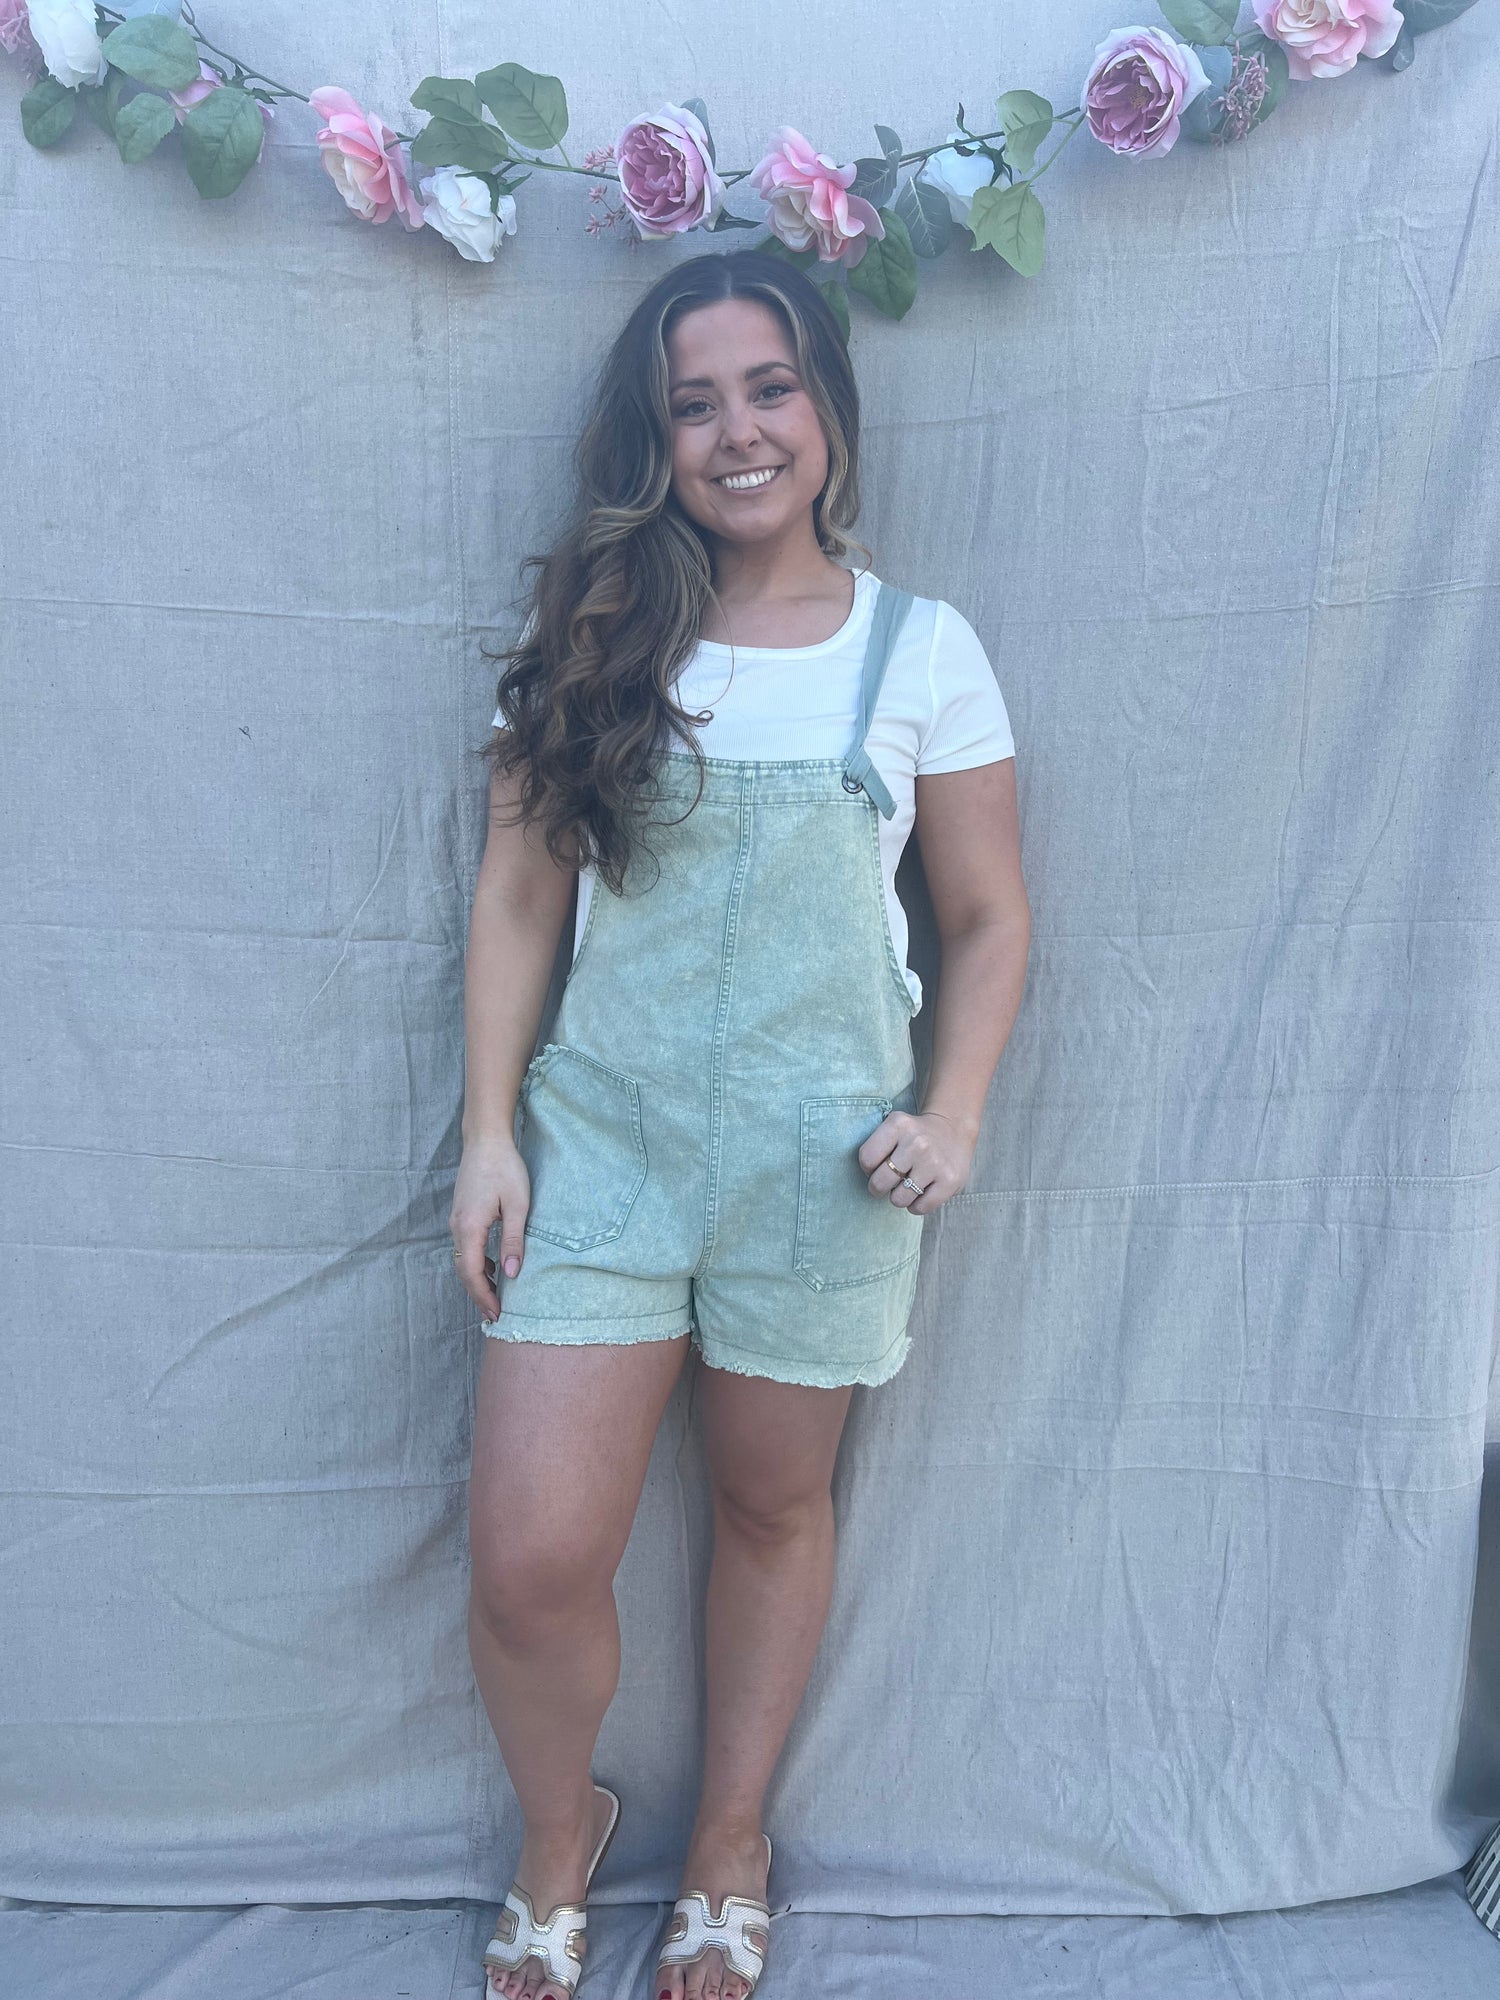 Rompers & Jumpsuits